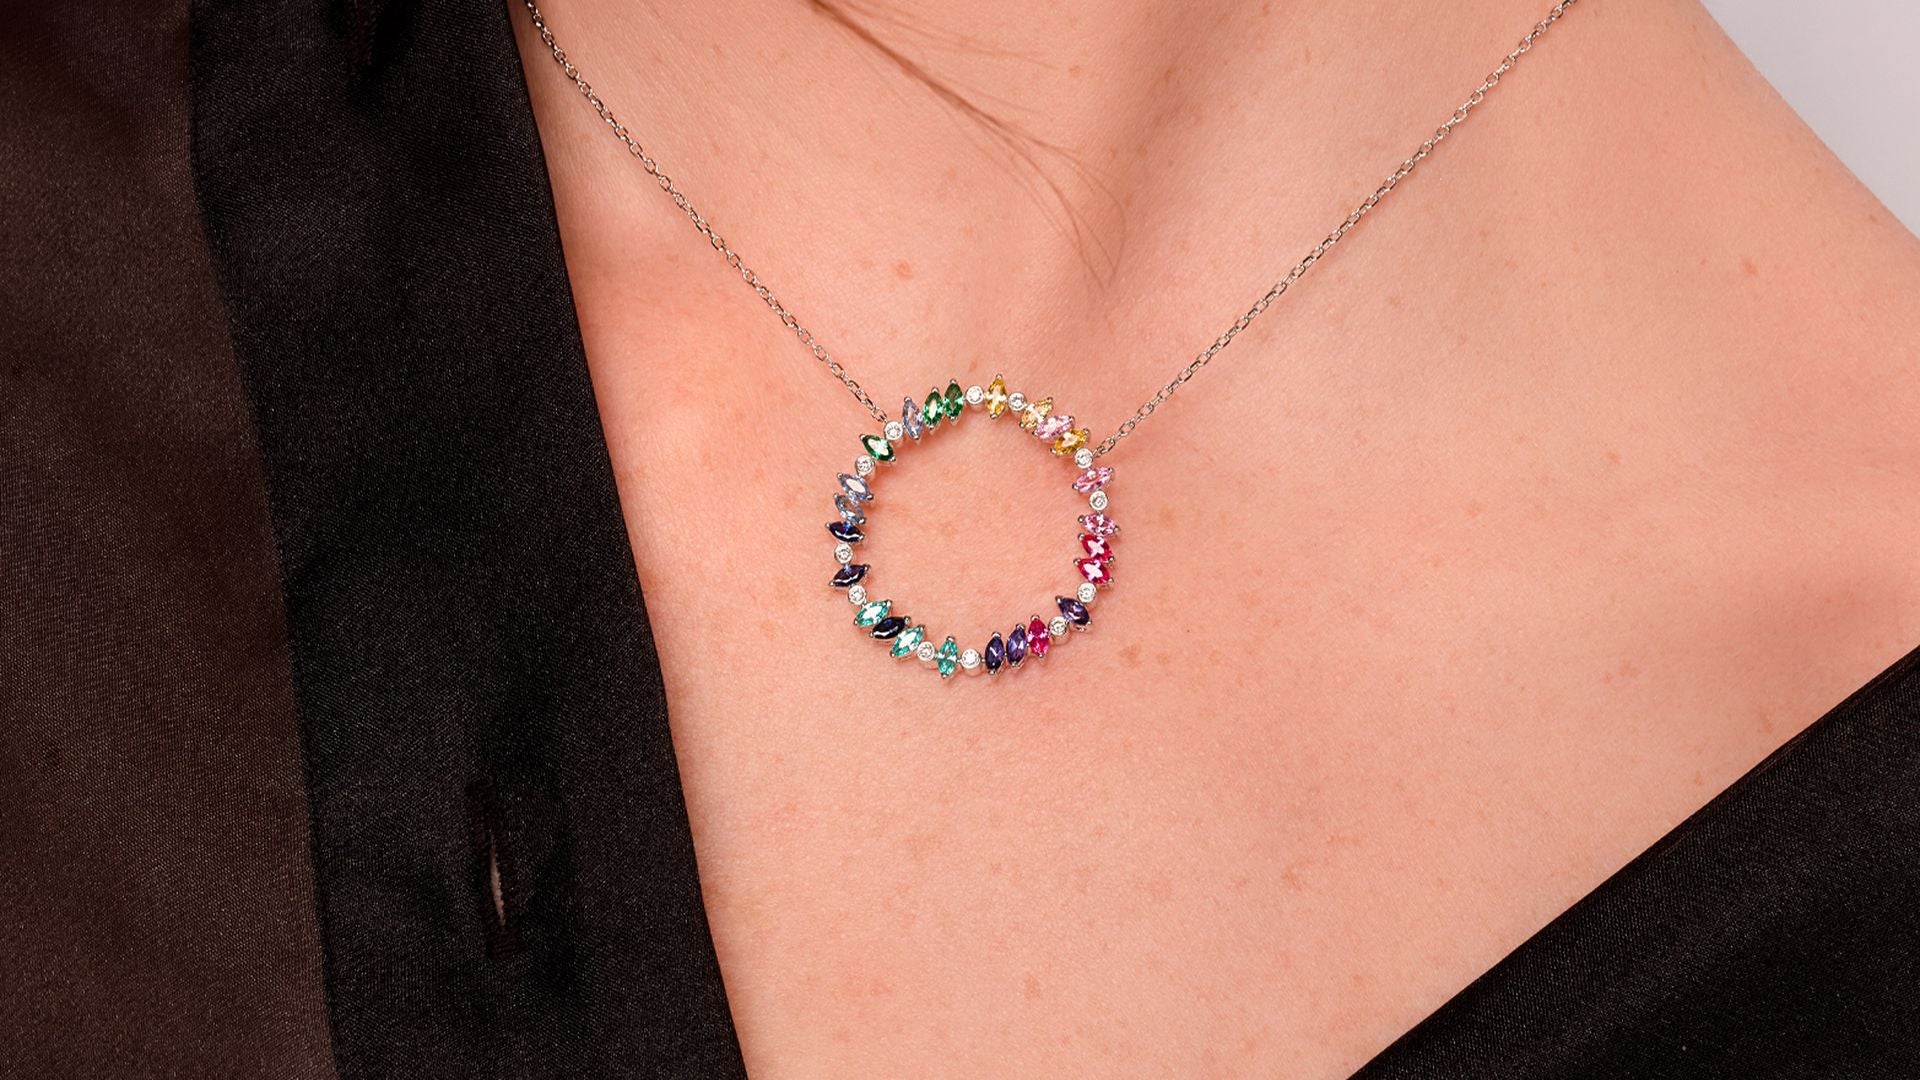 Lark & Berry unveils the Rainbow Veto Collection - A special luxury jewellery suite and symbol of hope and resilience